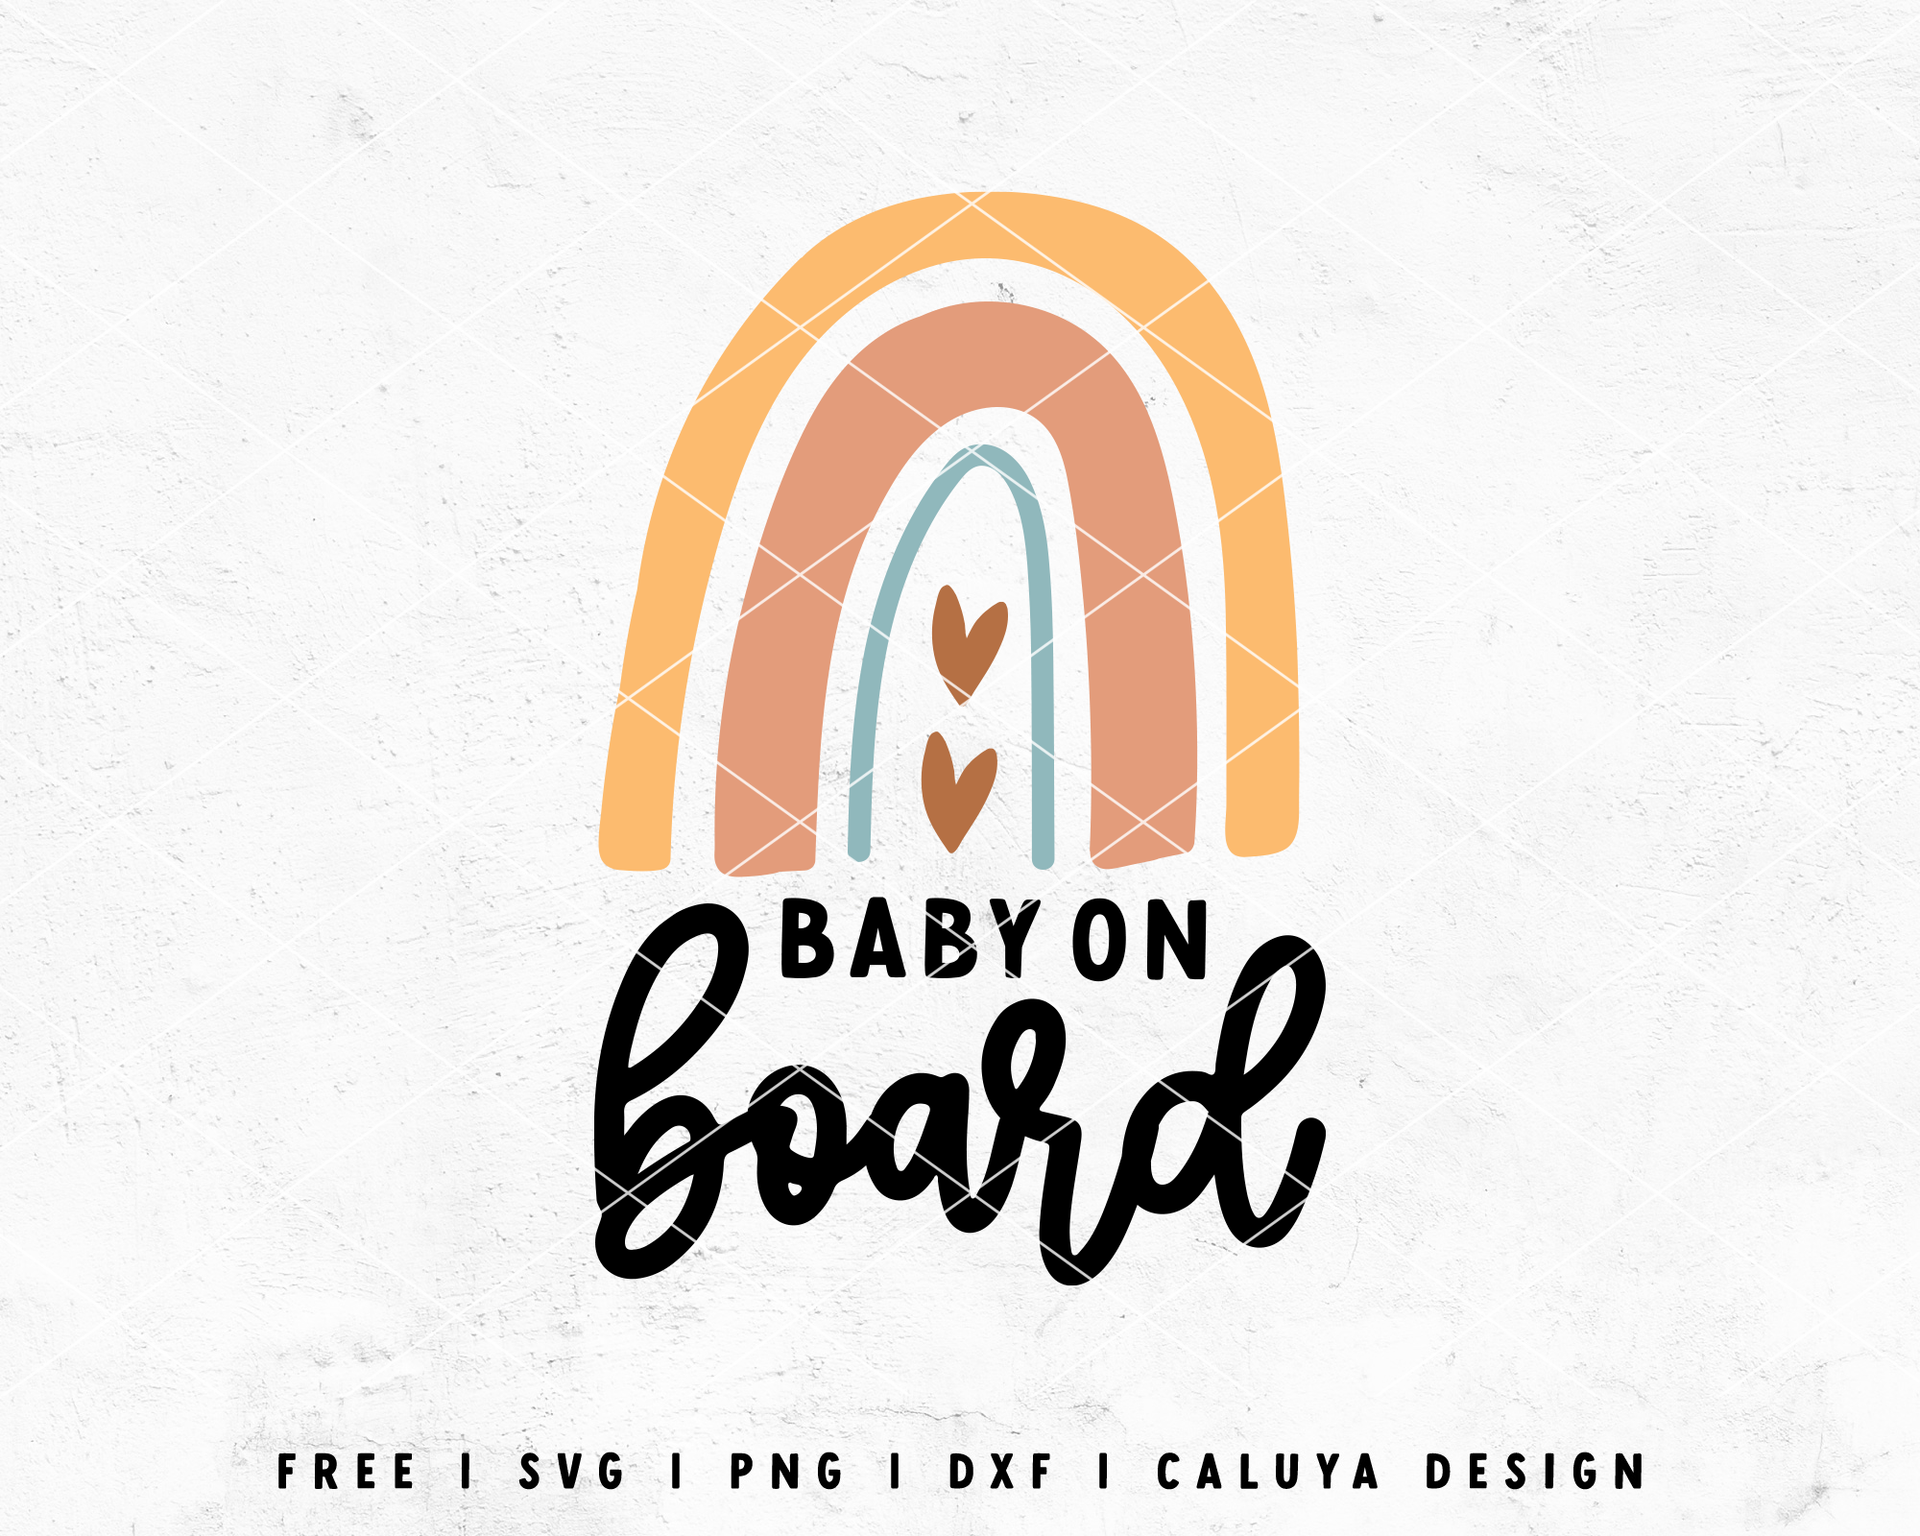 Premium Vector Baby on board svg, baby on board